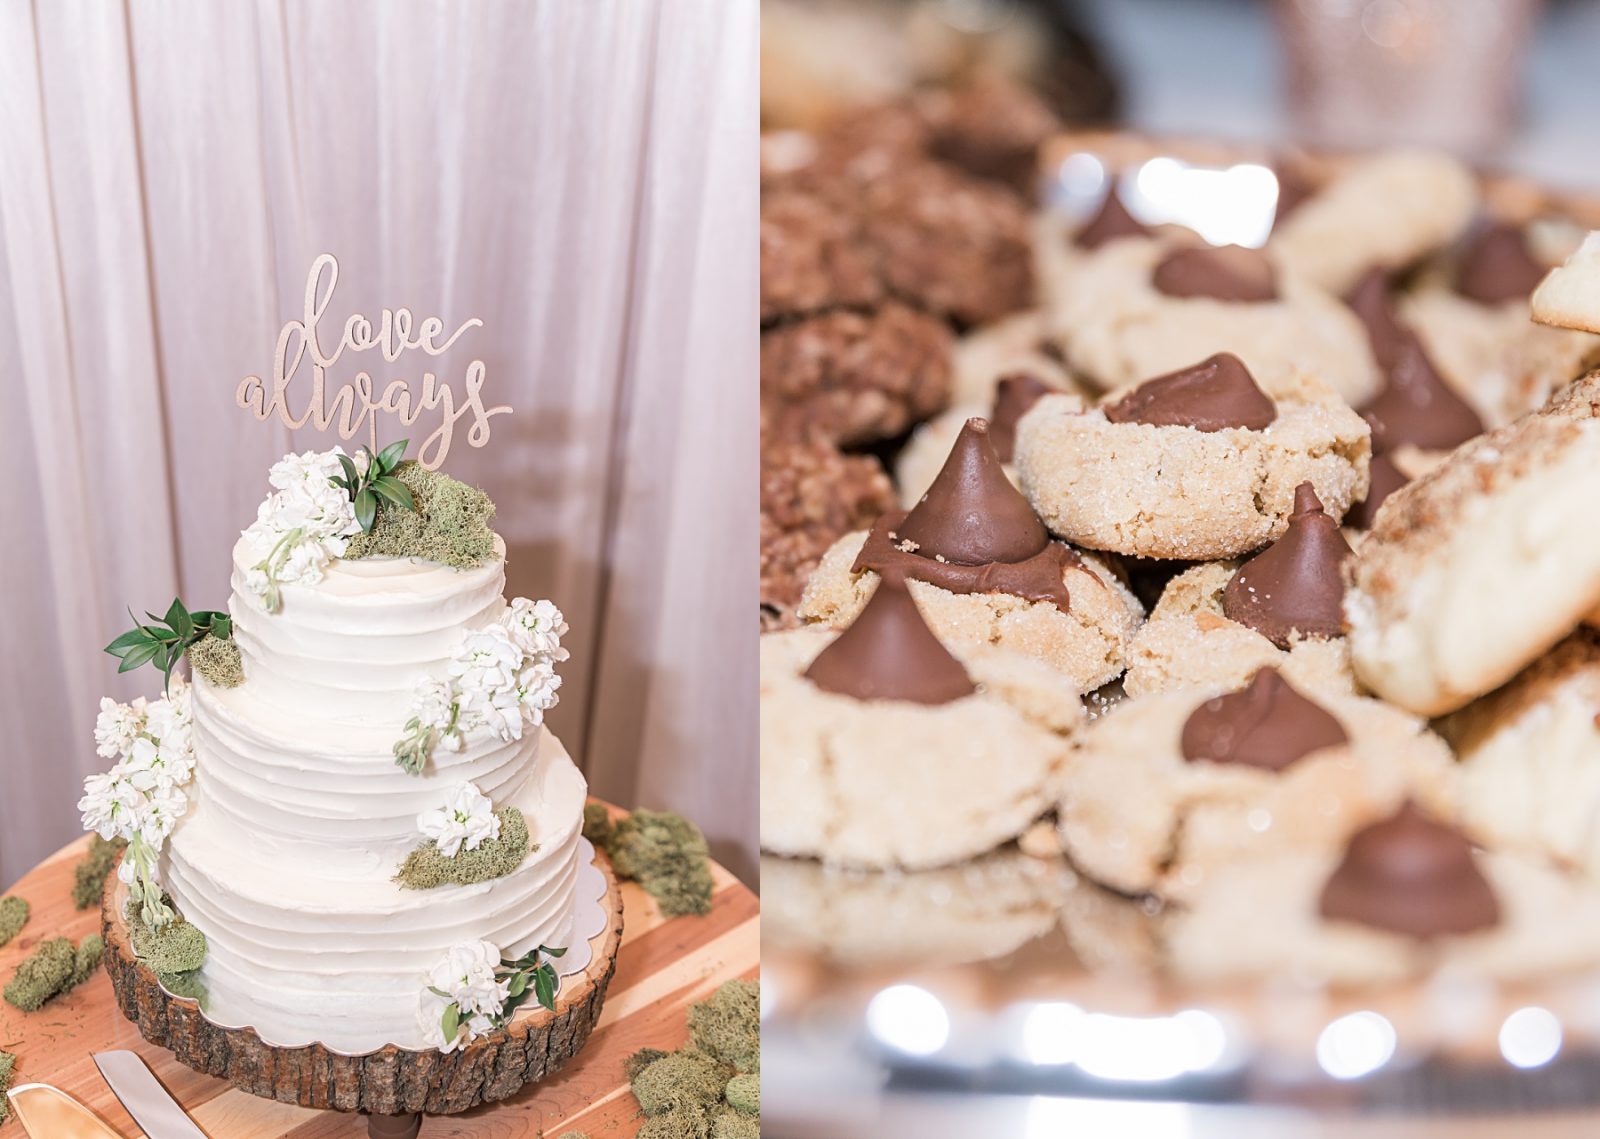 Wedding photography by Diana Gramlich, wedding cake and cookie table